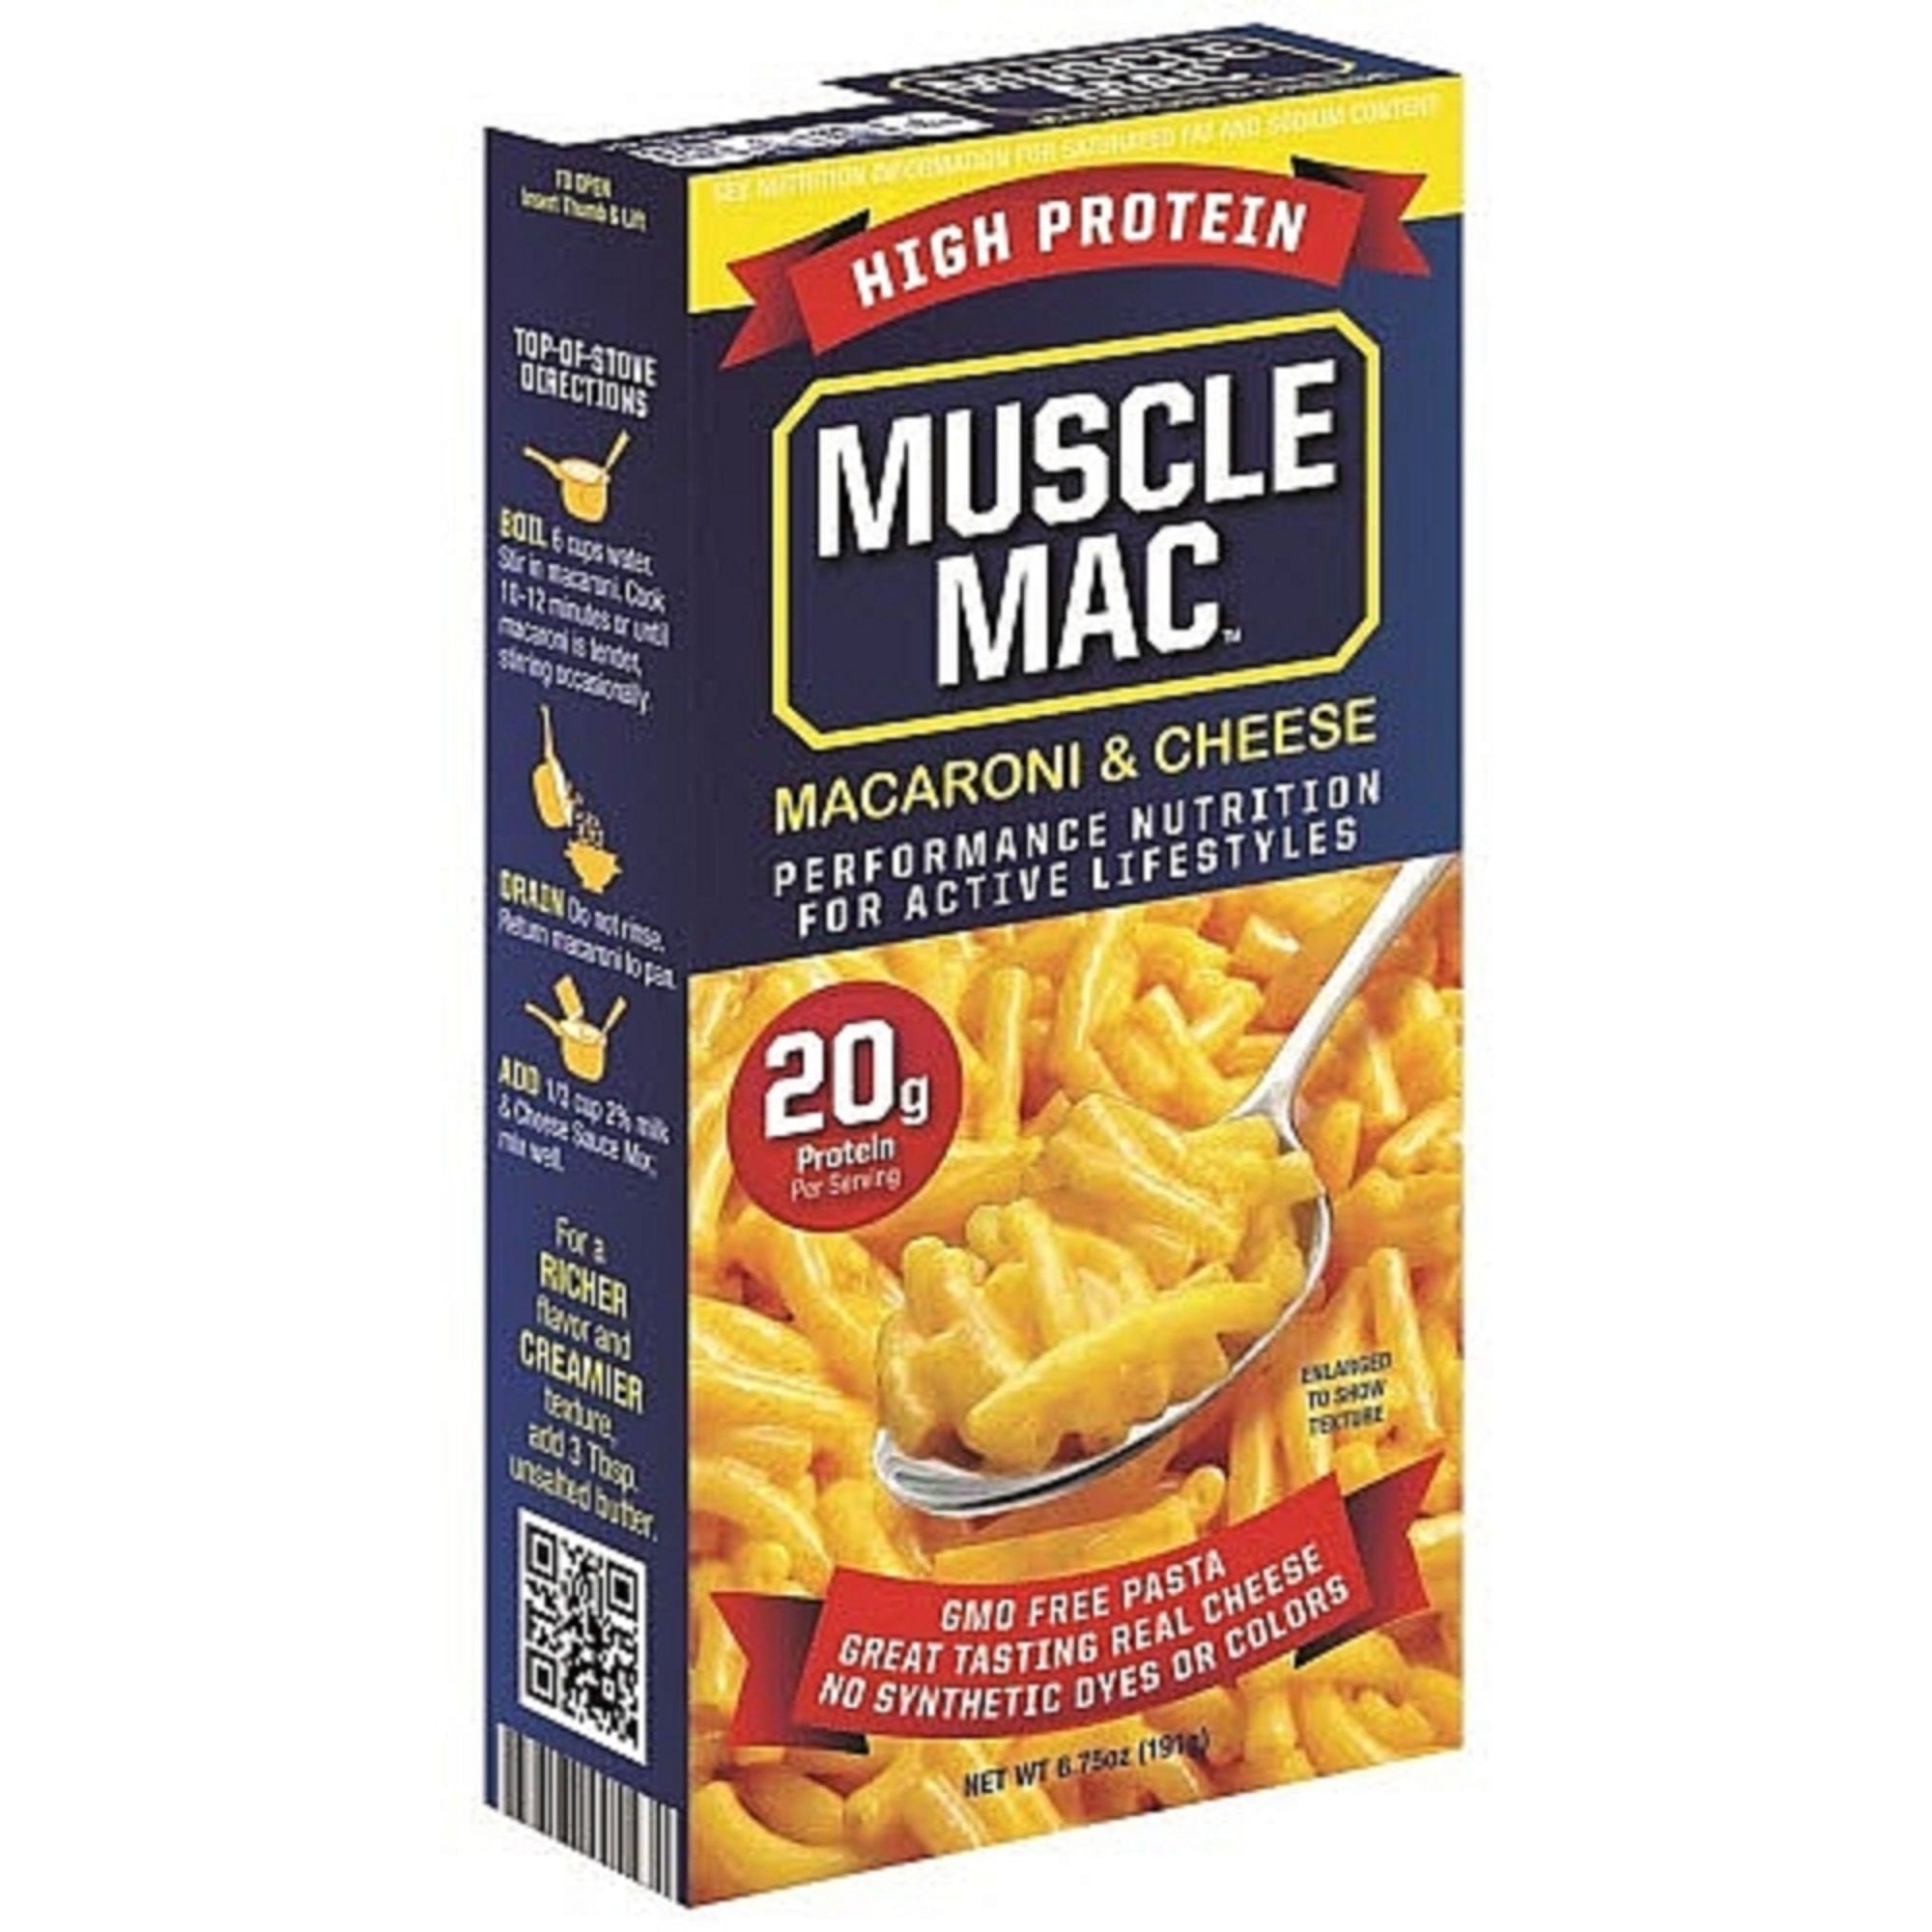 MuscleMac Protein Mac and Cheese Box musclemac-protein-mac-and-cheese-box Food MuscleMac